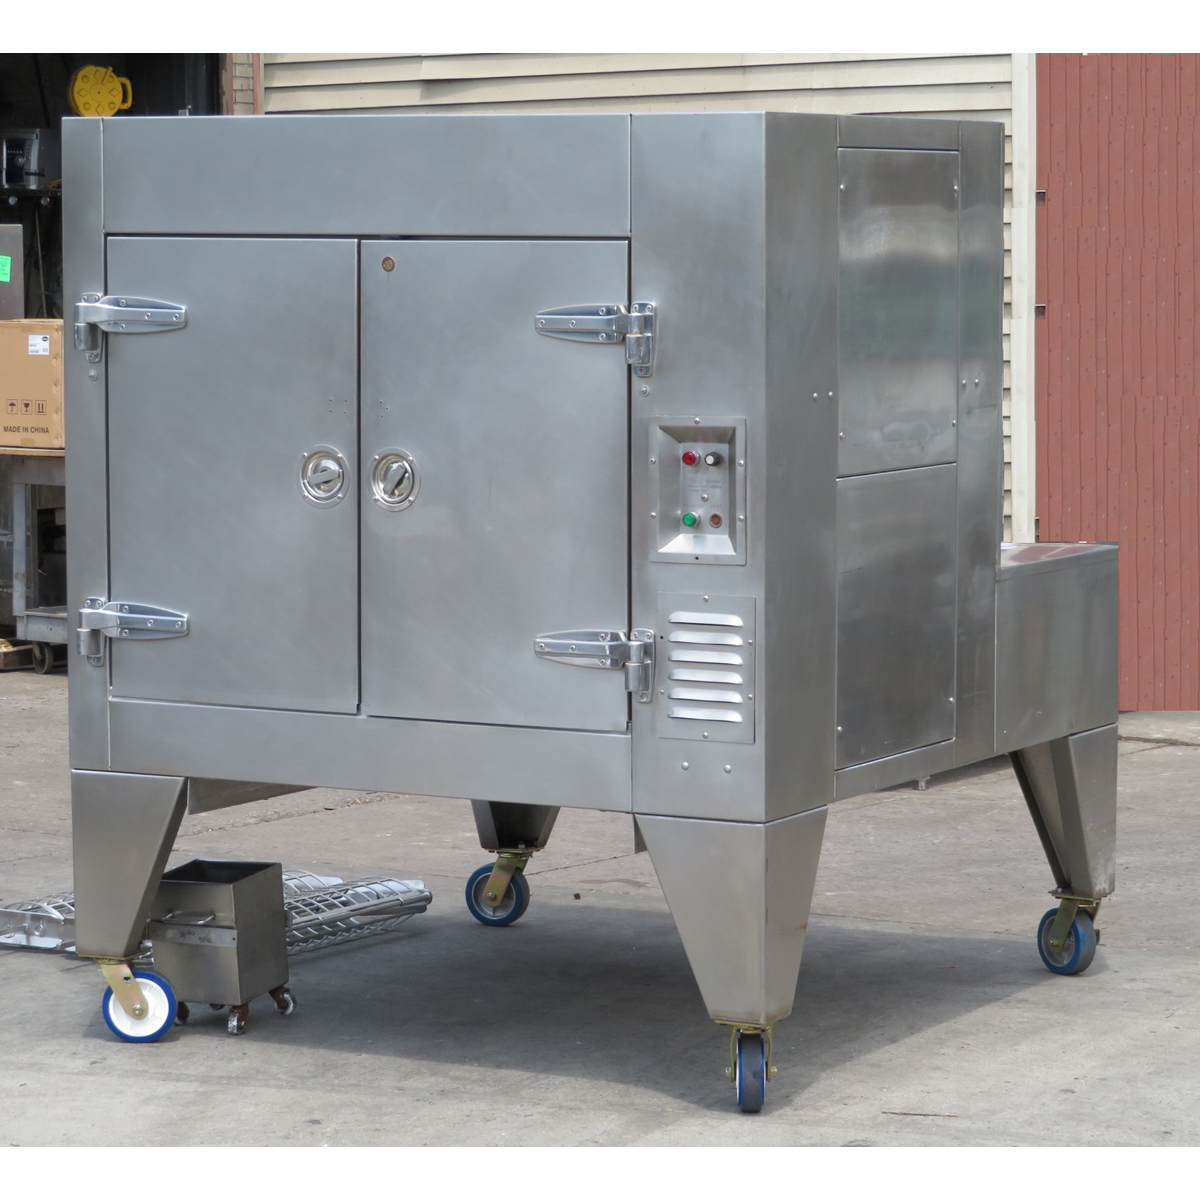 Woodstone MT. OLYMPUS WS-SFR-6-SB Stone Fired Rotisserie on Wheels with Cooking Grill, Used Excellent Condition image 5